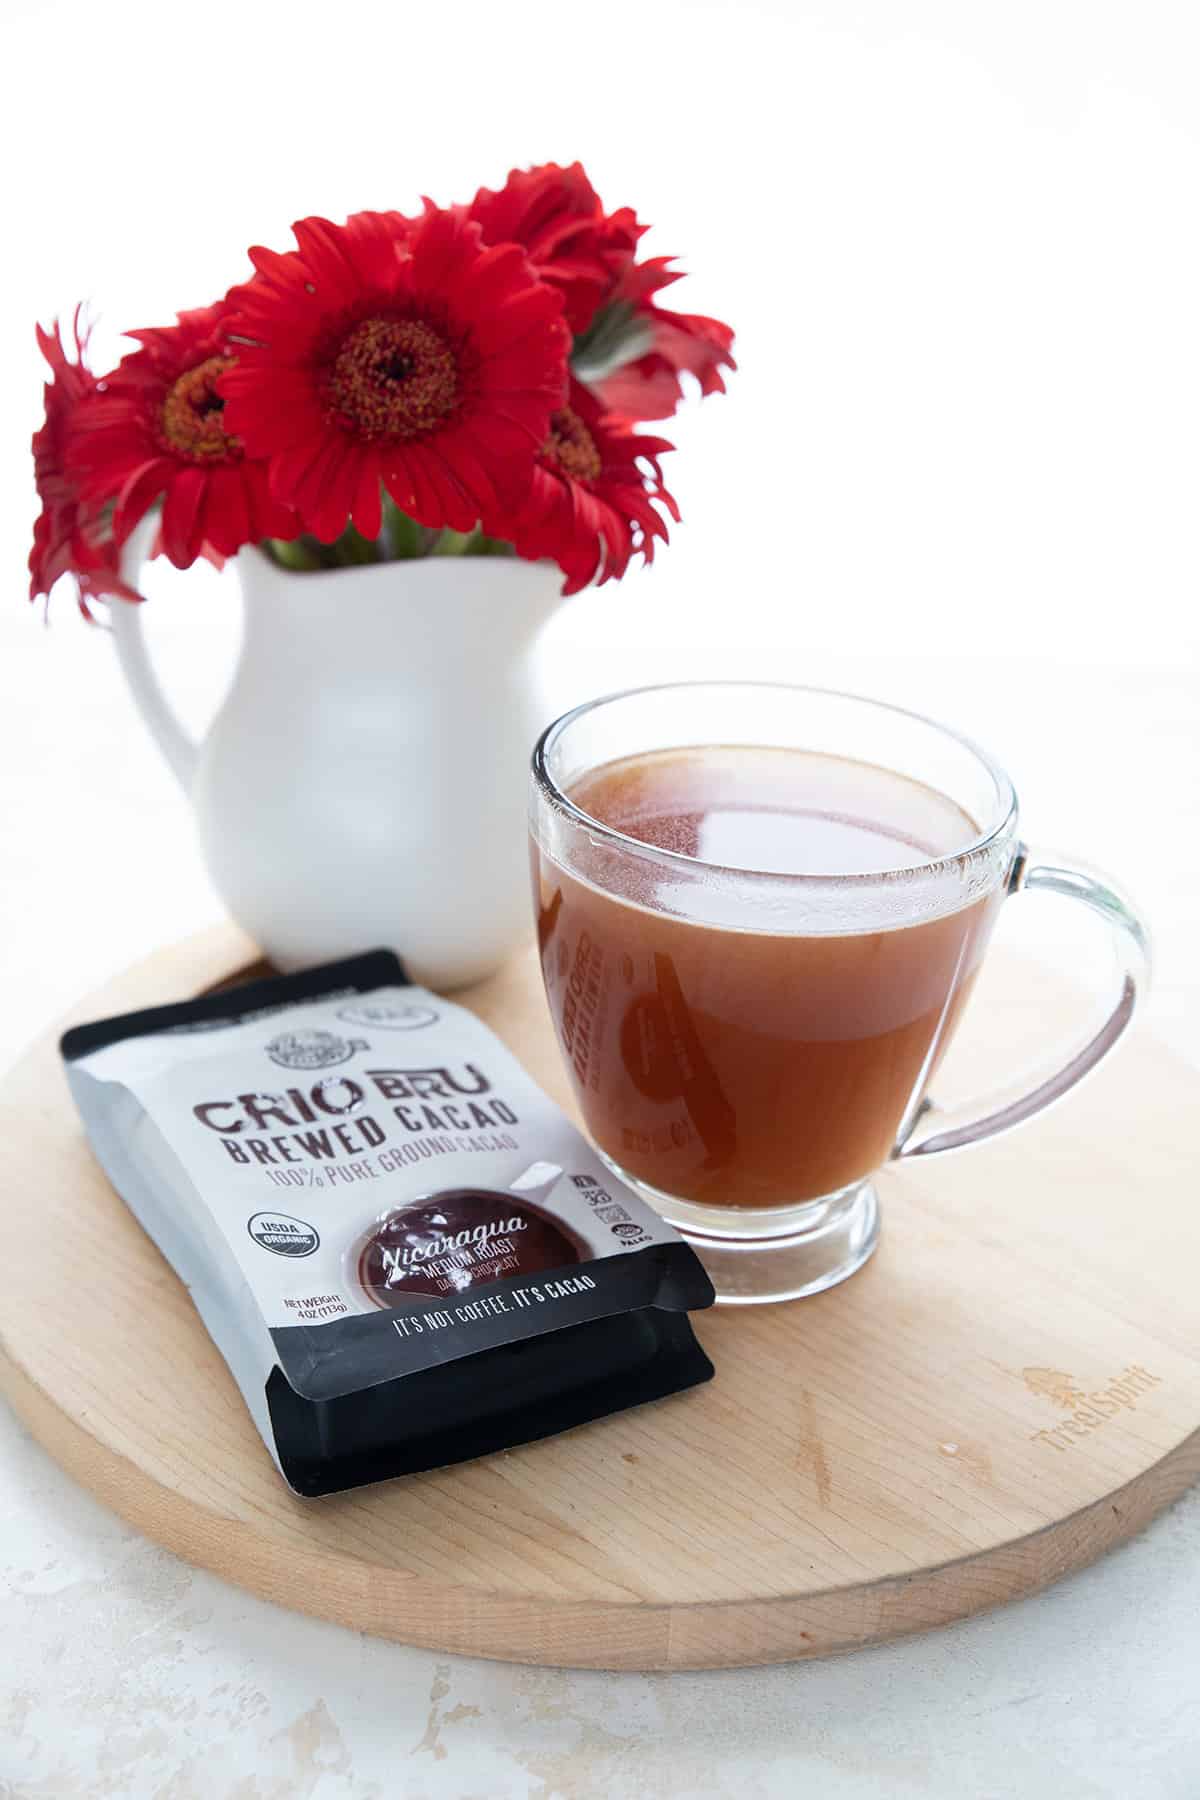 A cup of brewed cacao on a wooden platter, with red flowers and a bag of Crio Bru.